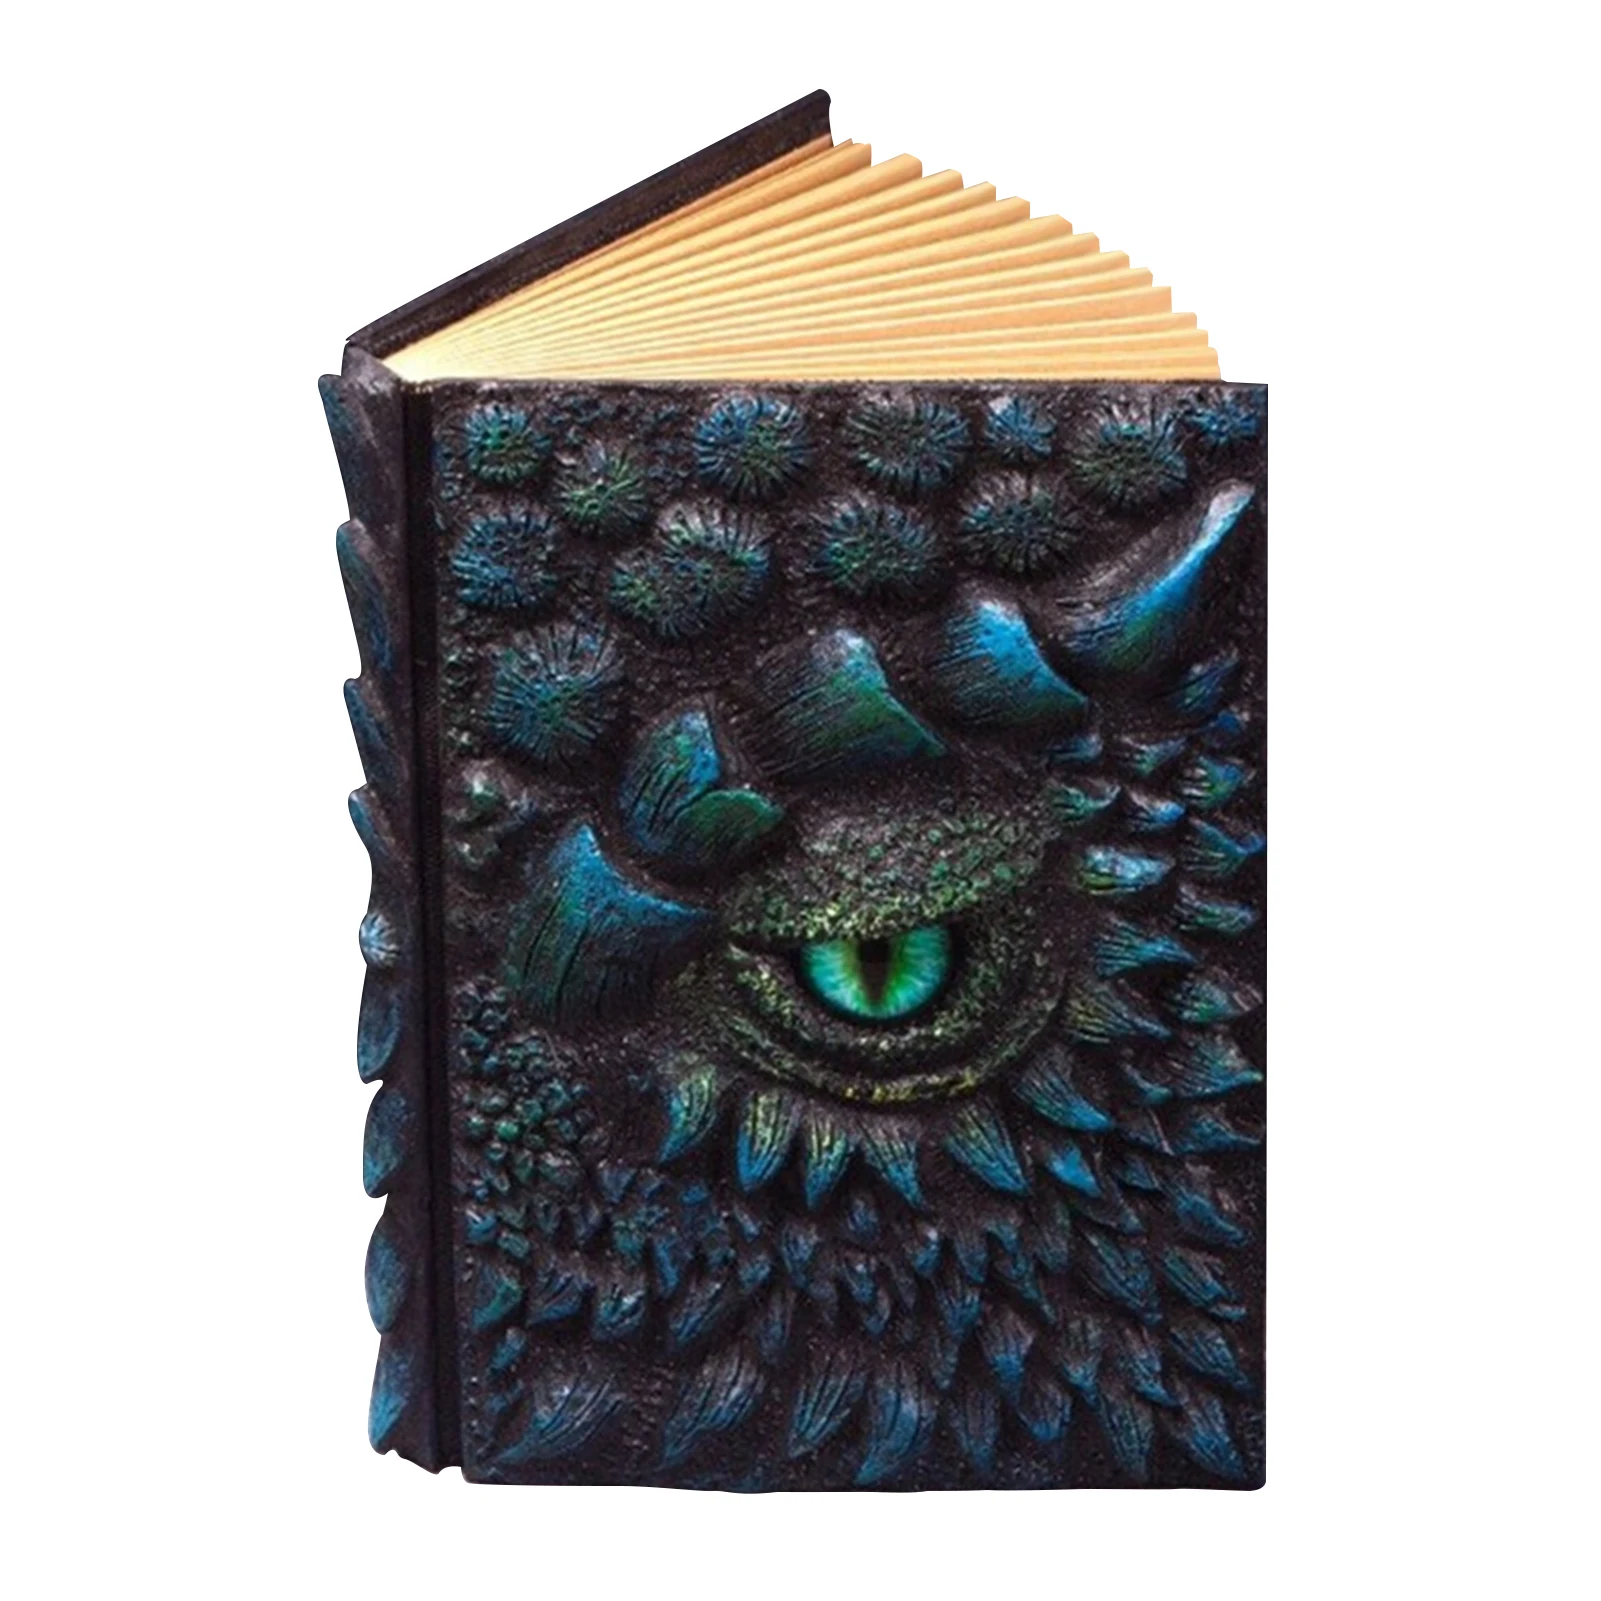 2022 New A5 Notebook Vintage Retro 3D Dragon Theme Relief Blank Paper Diary Book Planner Notepad School Stationery Supplies 1PCS